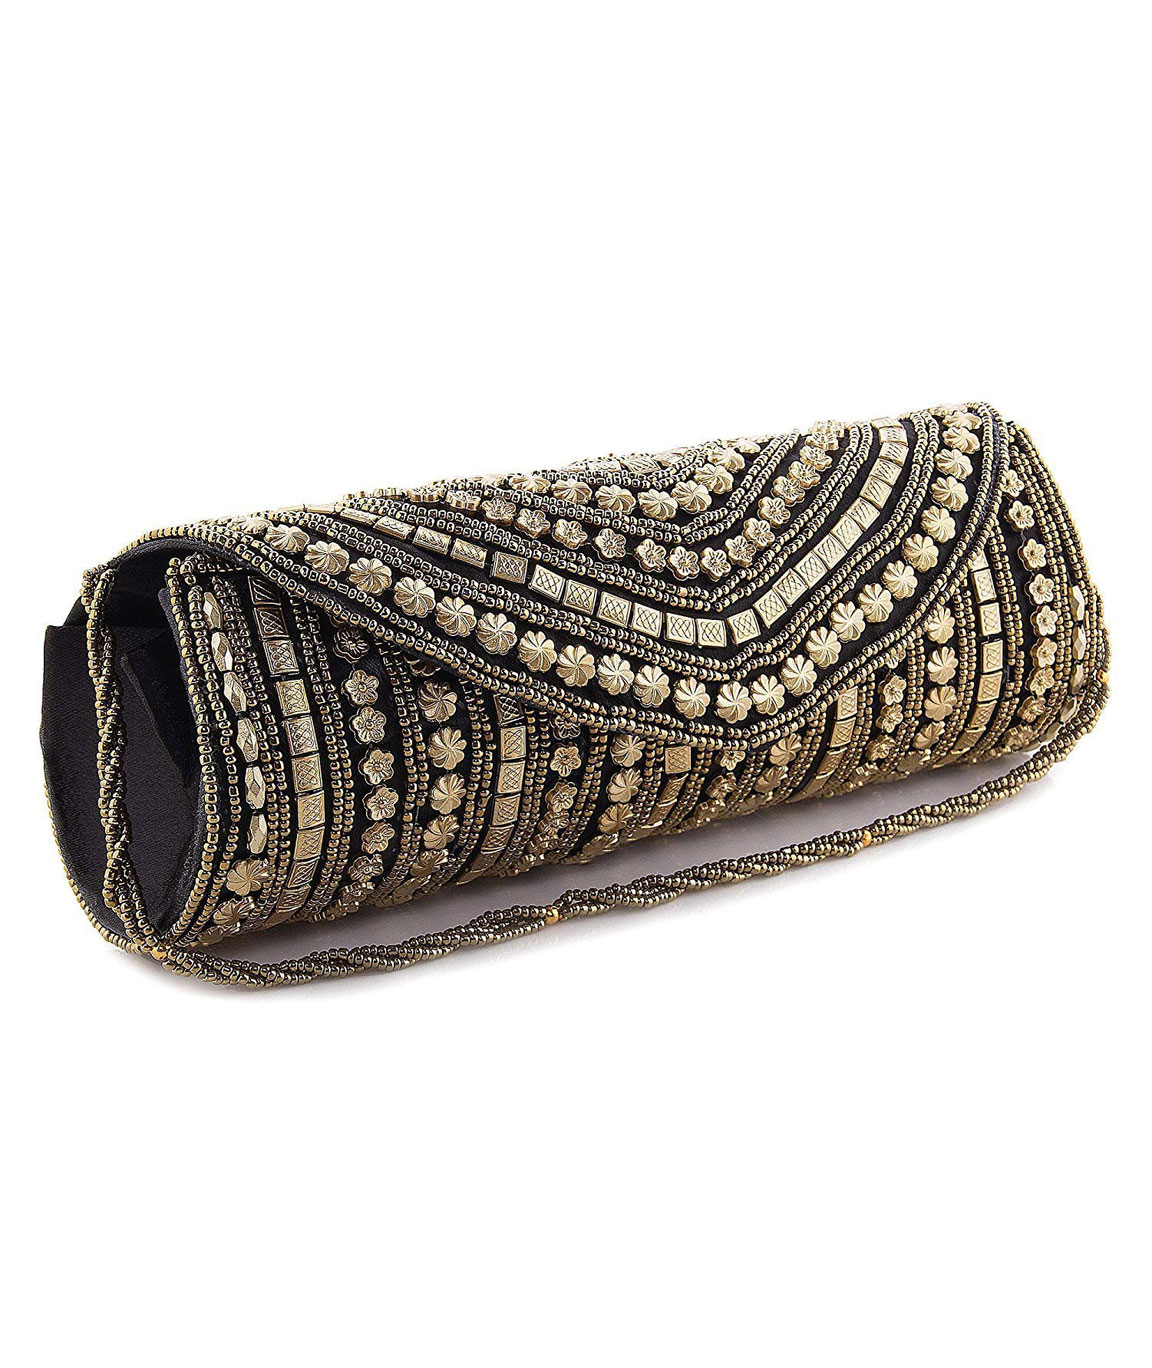 Buy Minimalist Black Clutch Purse, Bag With, Mid Century Design, Victorian  Inspired and Sling for Prom, Anniversary, Gifting and Evening Party. Online  in India - Etsy